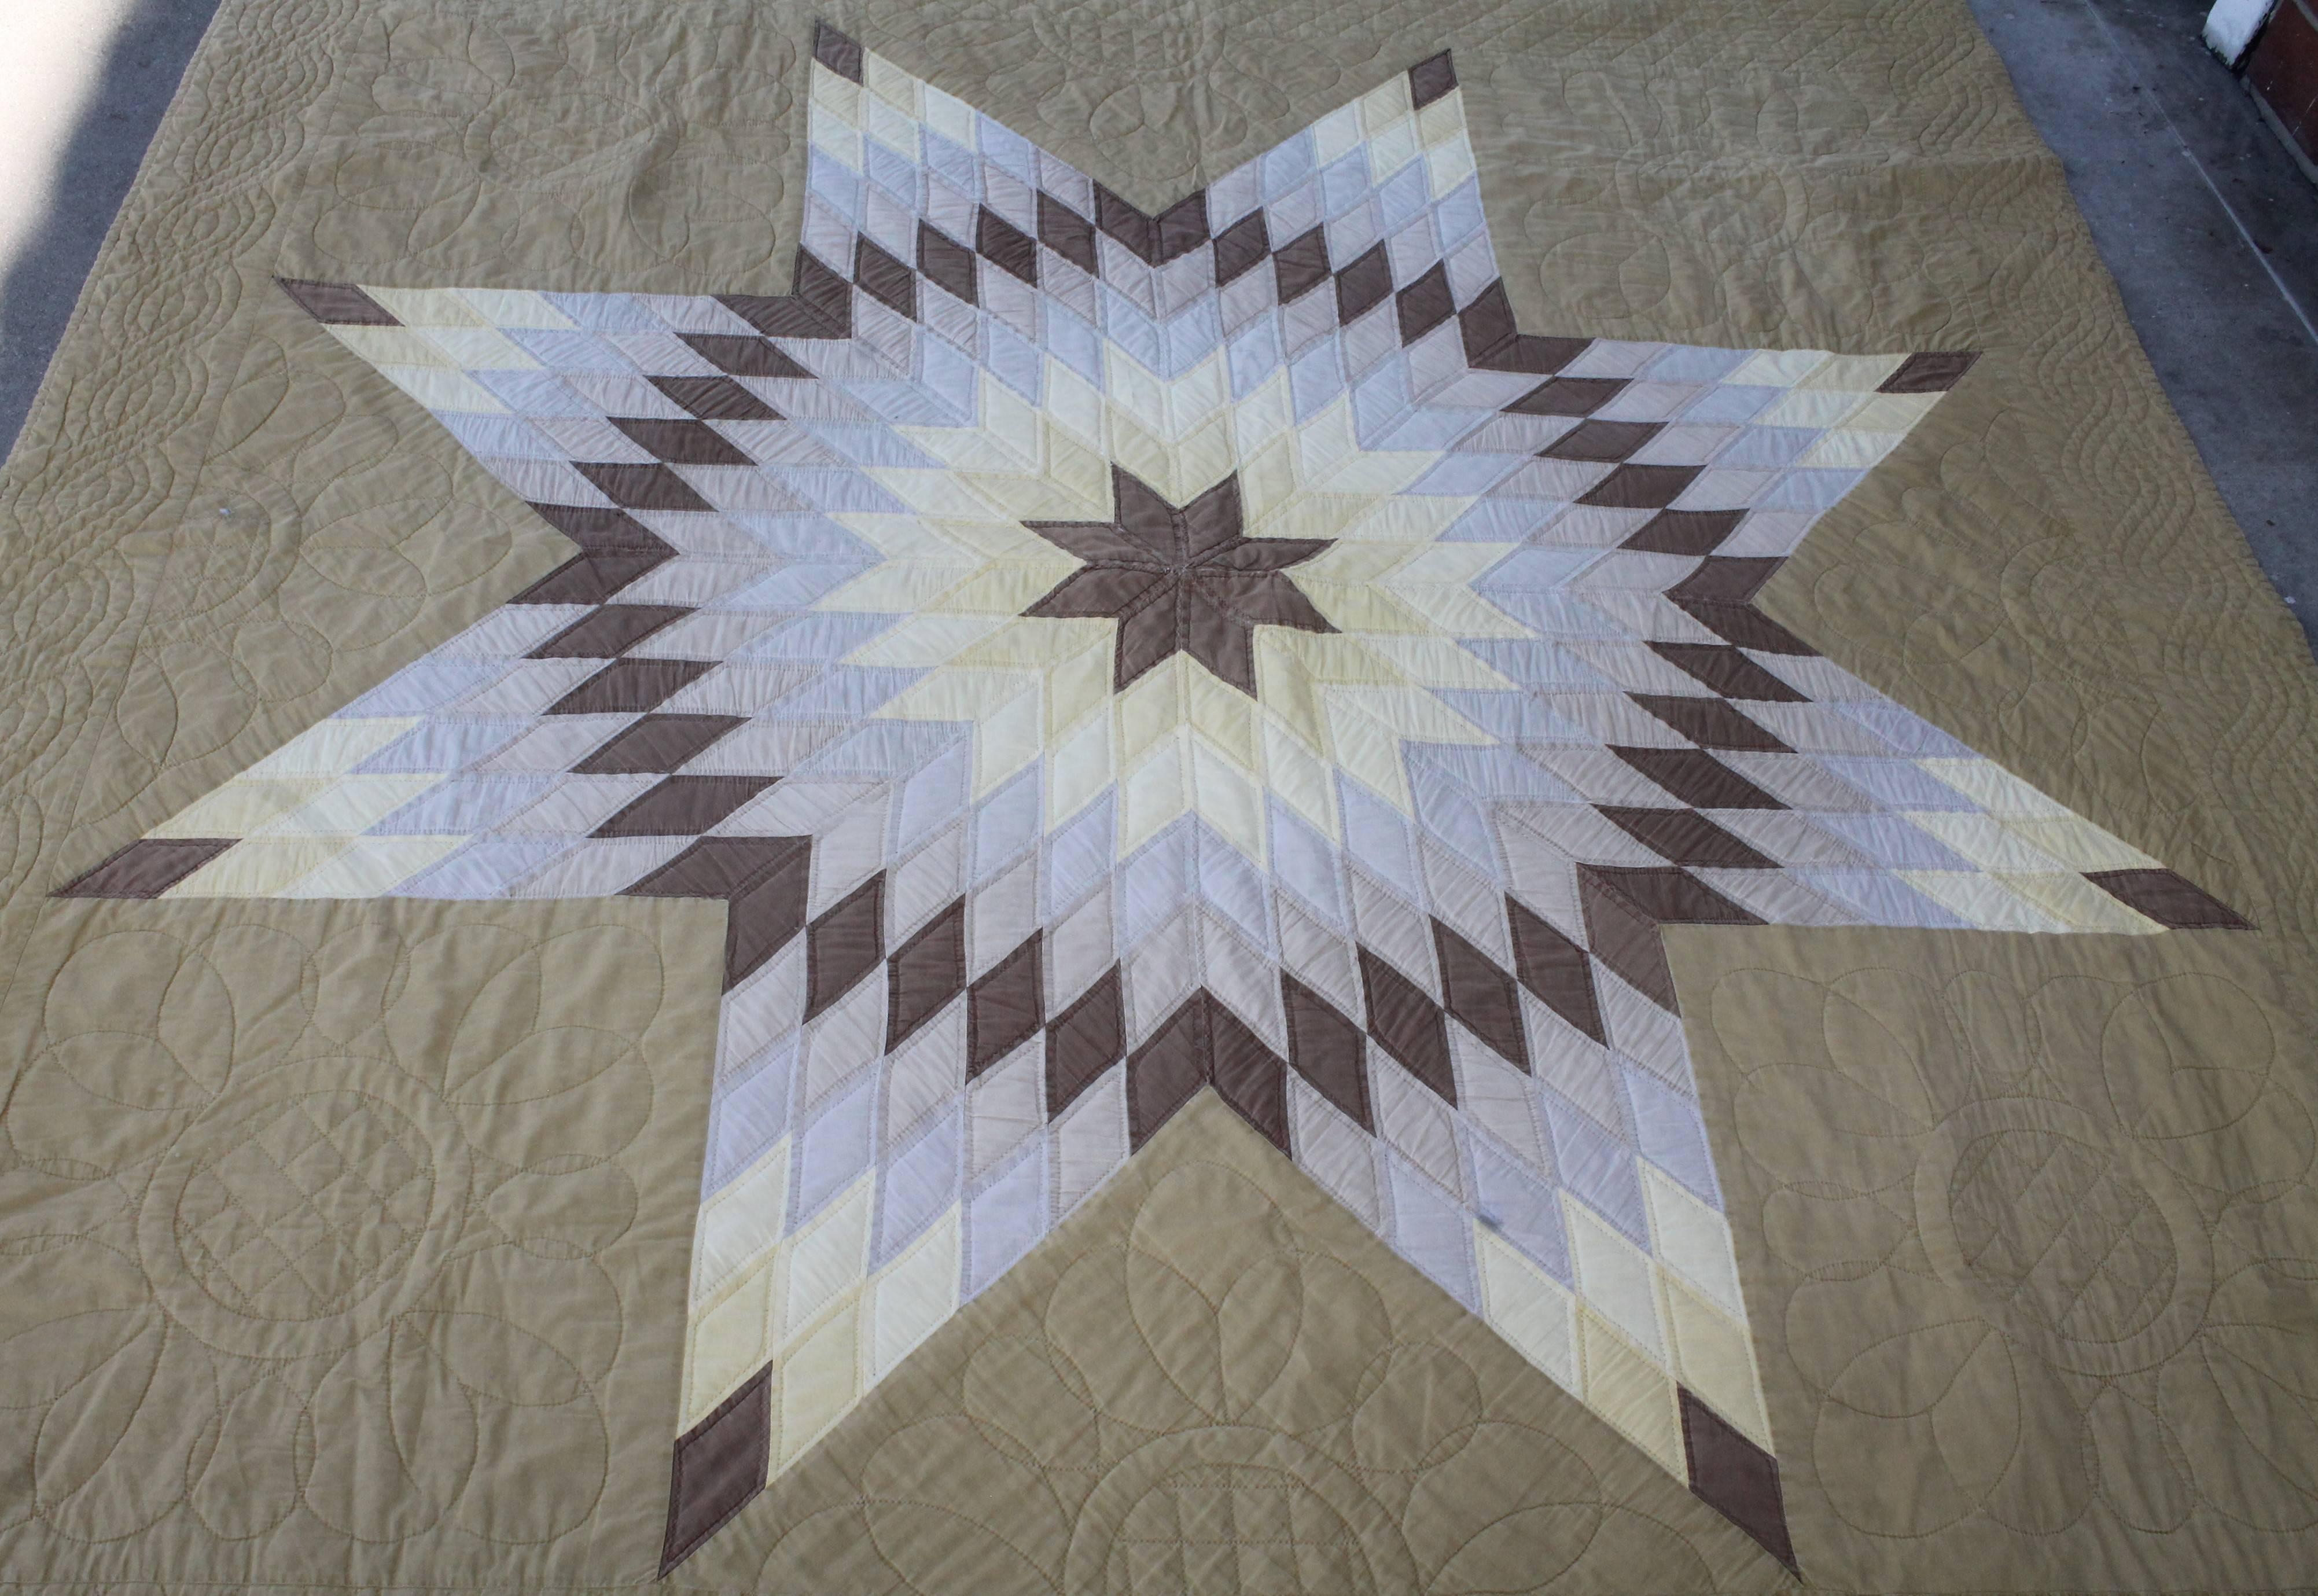 This finely quilted and pieced Amish Star quilt is from Holmes County, Ohio and is in good condition with minor wear on binding barely noticeable. So unusual these fall somber colors.